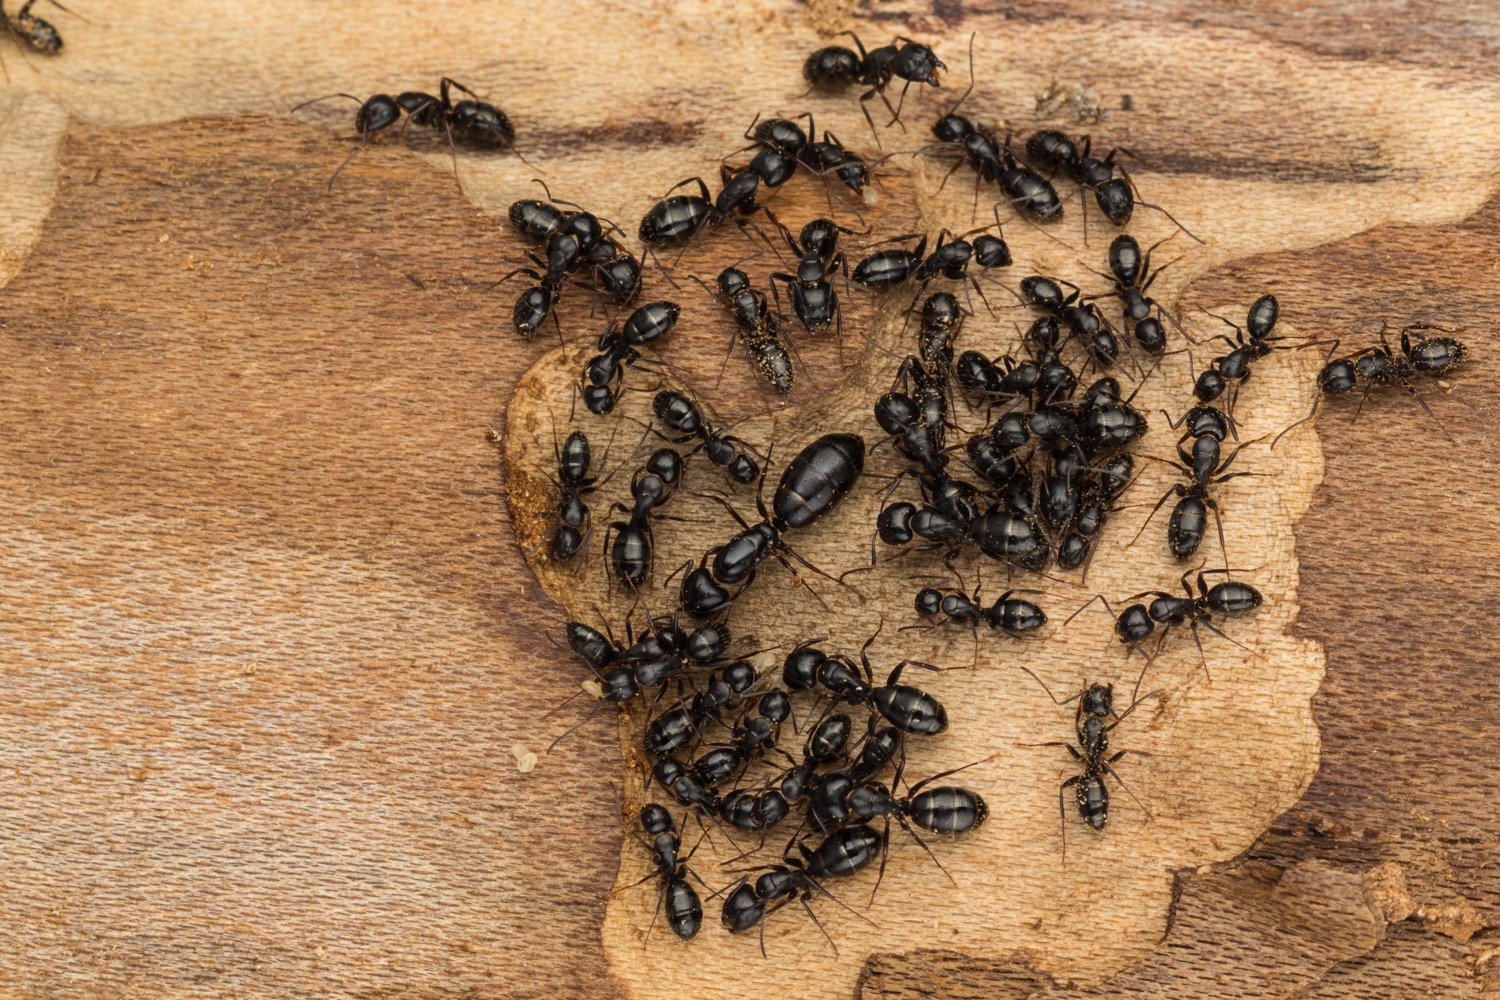 Expert Ant Control Services in Orchard Park, NY